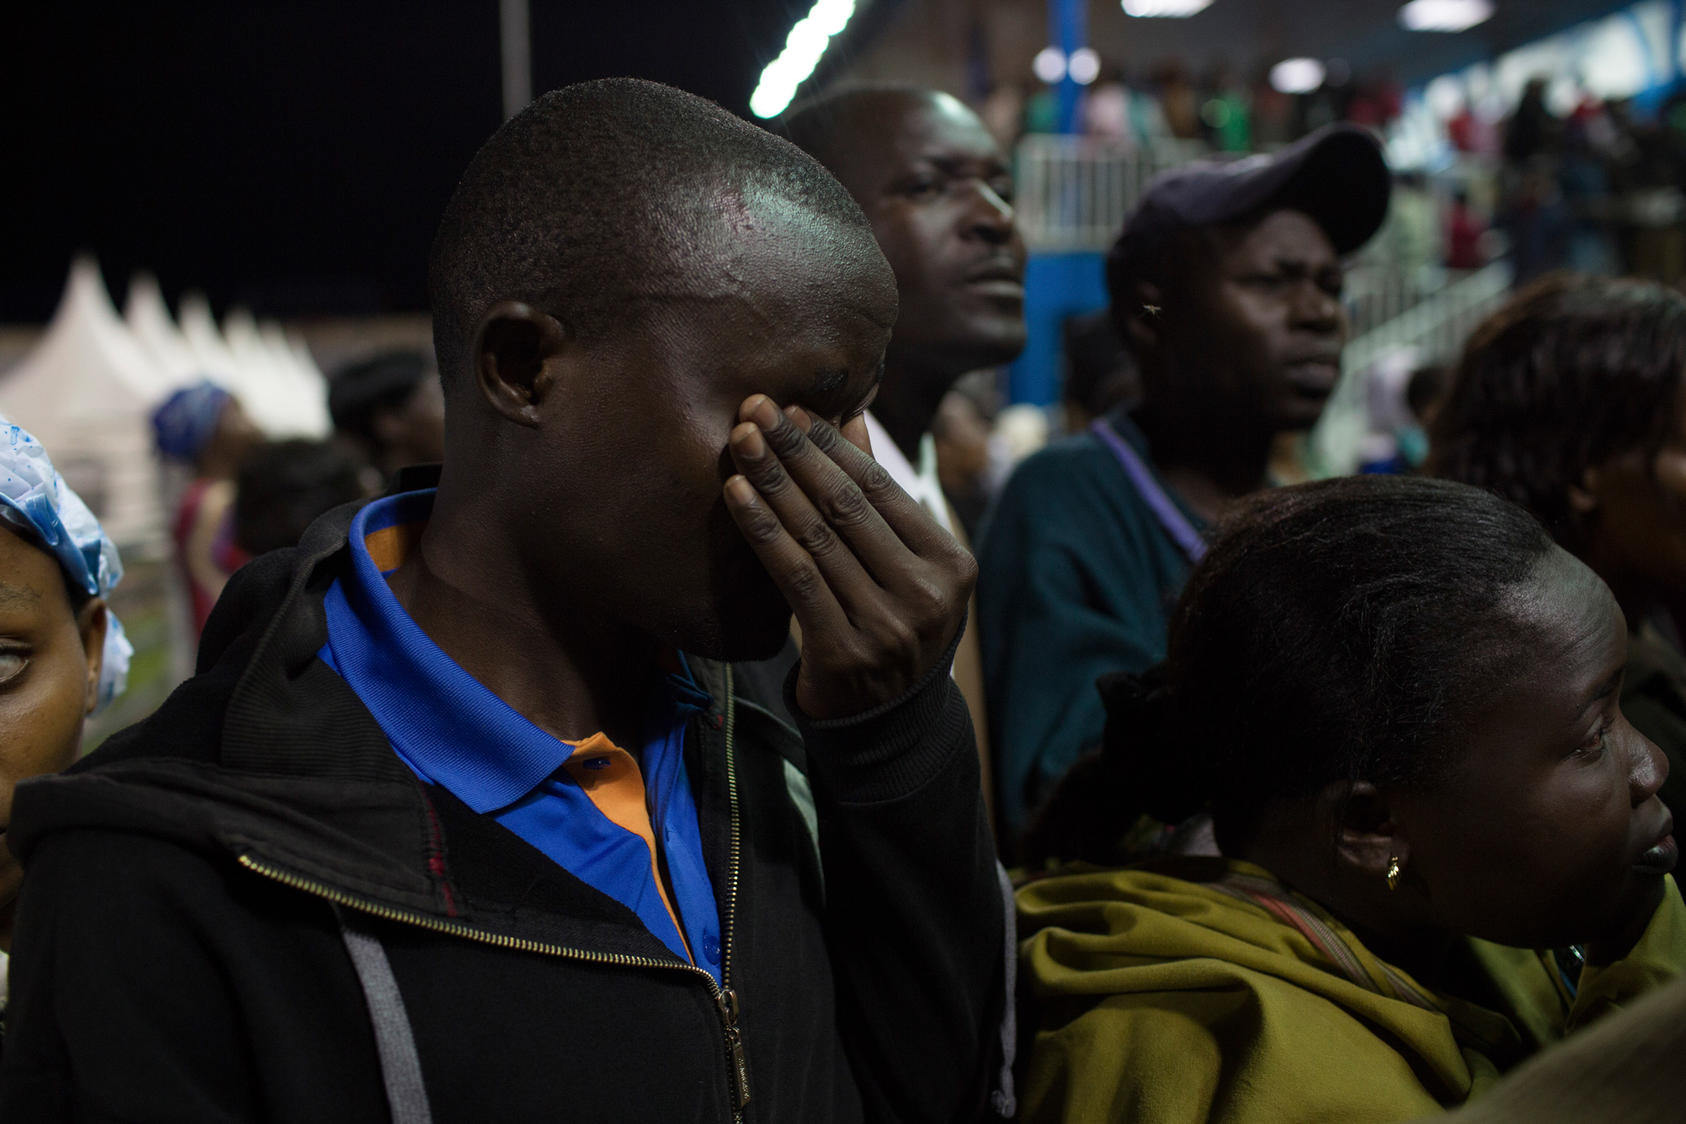 A family member wipes tears from his eyes after he spots his sister Eunice in the stadium which was being used as a crisis center after an attack at Garissa University College in Nairobi, Kenya, April 4, 2015. Scores of families were waiting on Saturday to identify relatives who died on Thursday when armed men belonging to the Shabab stormed a university campus and killed nearly 150 students.